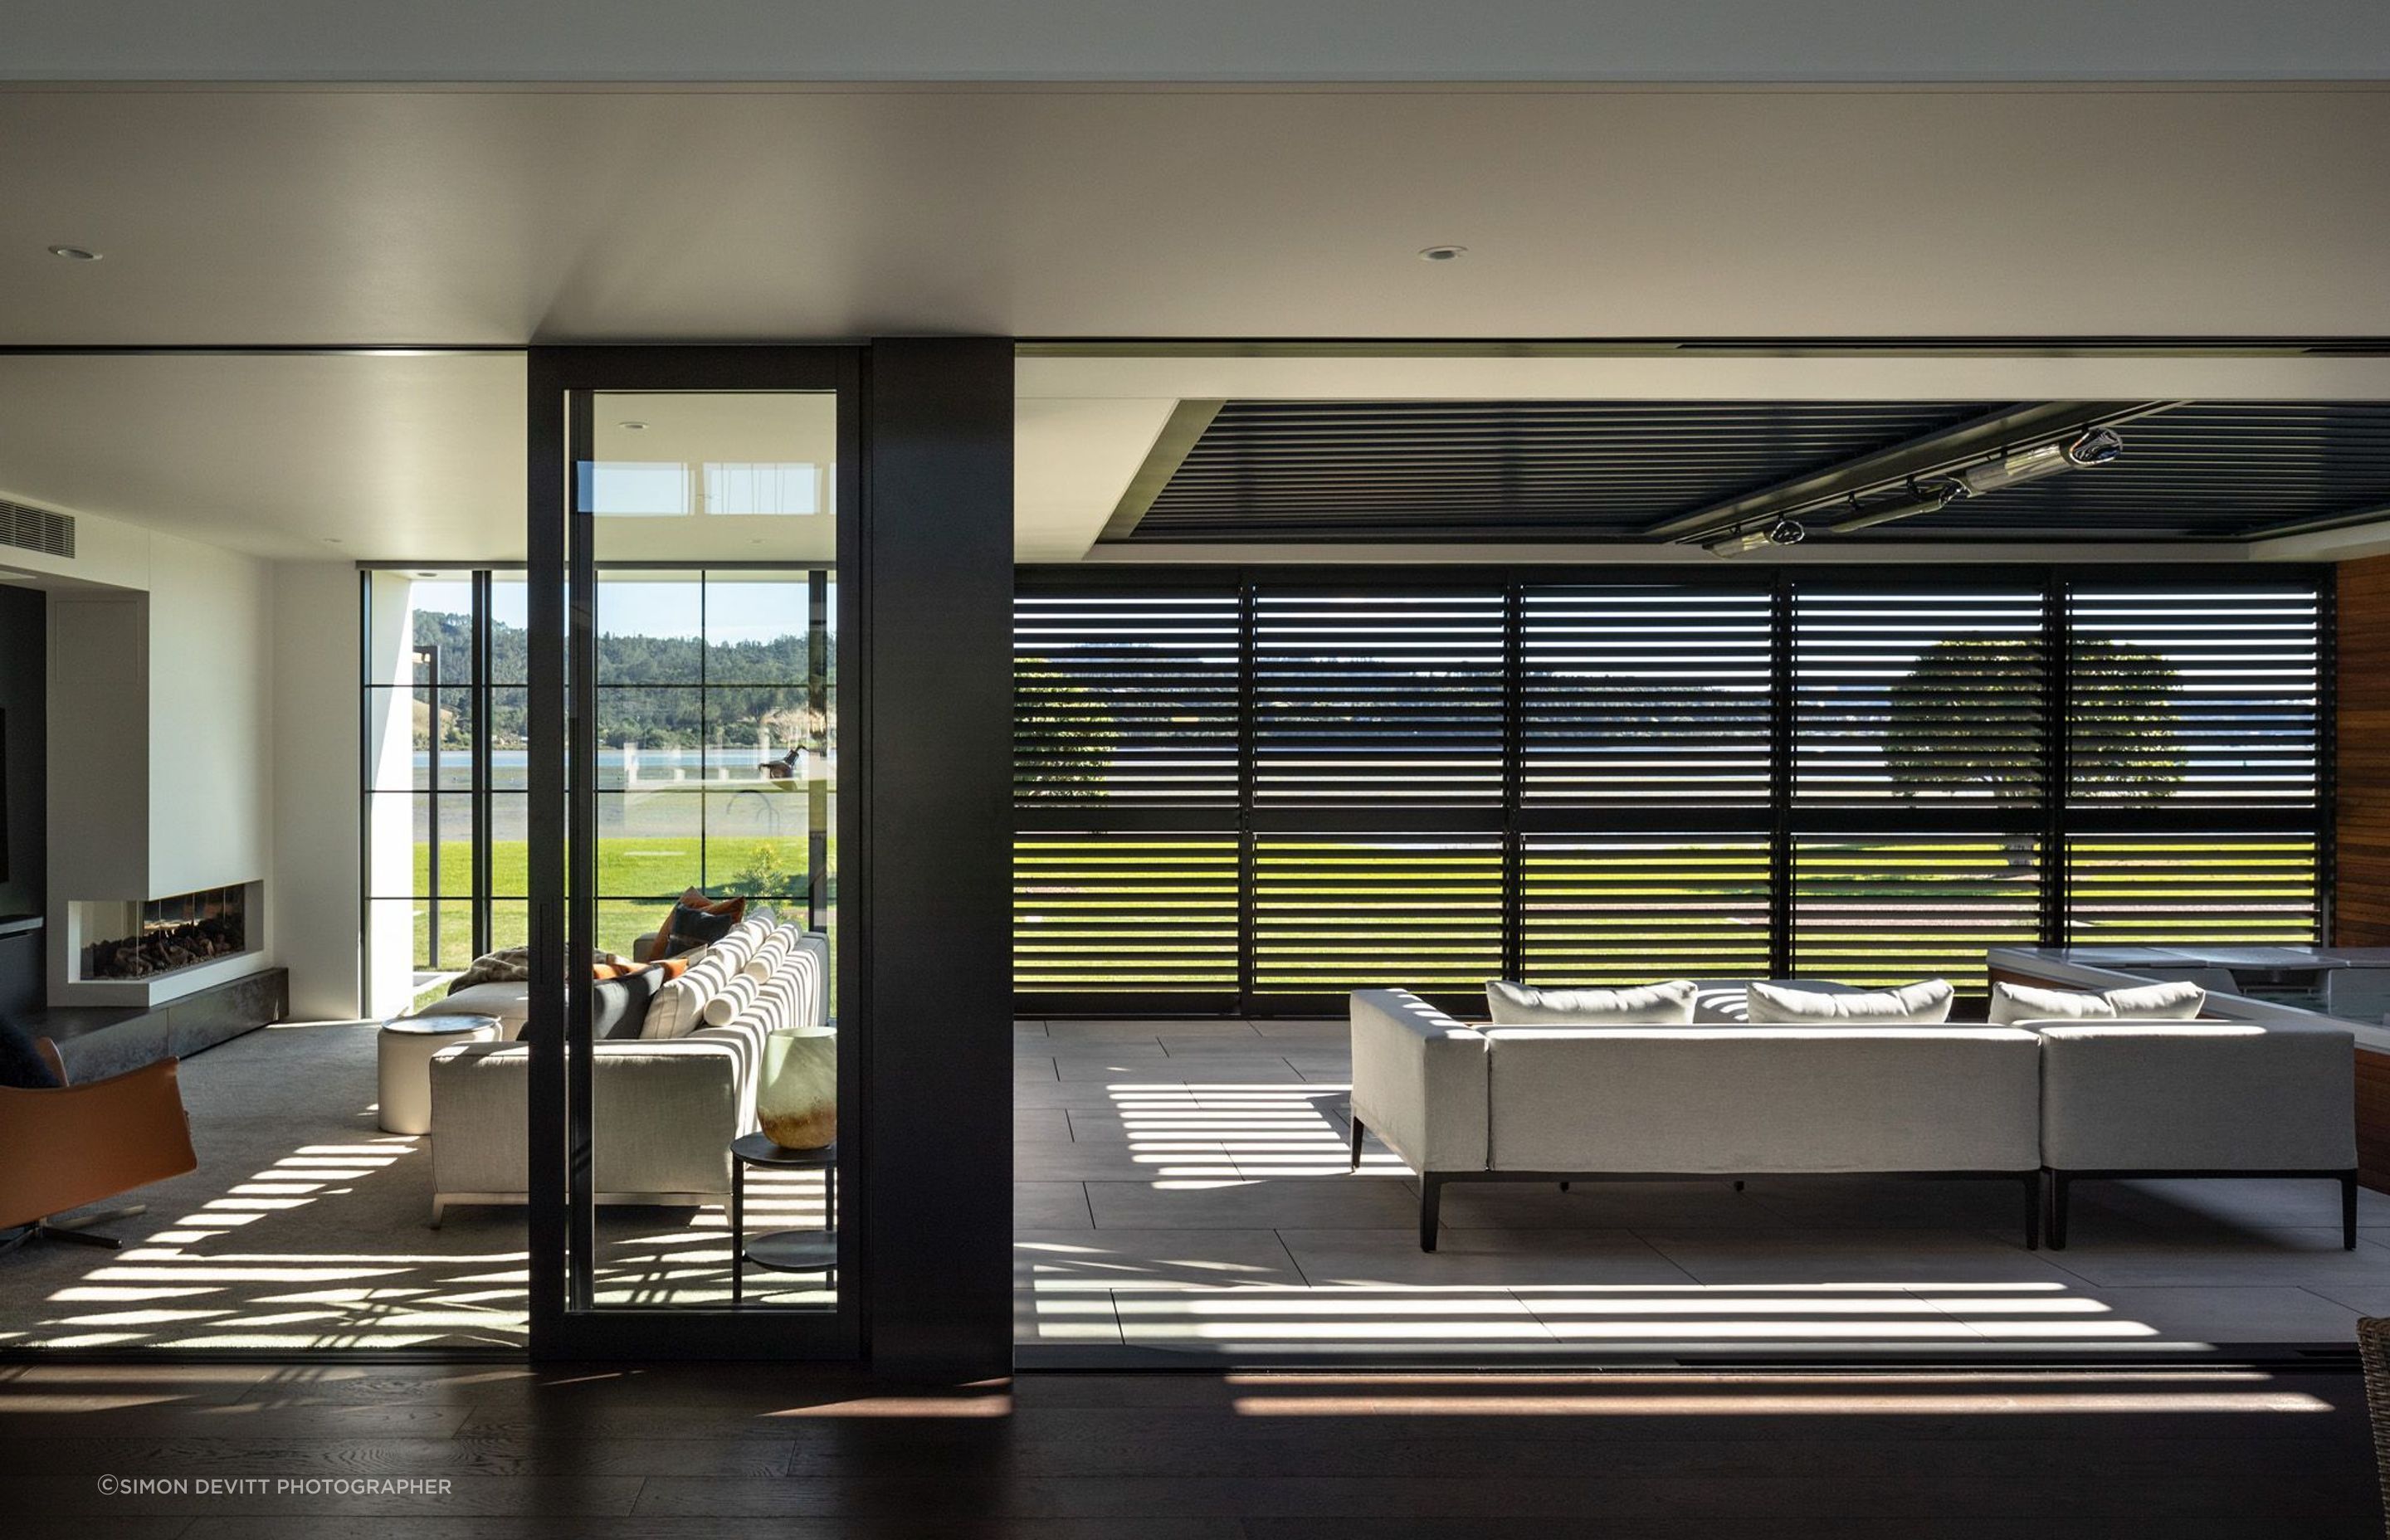 Louvres add protection and privacy in the indoor and outdoor lounges.